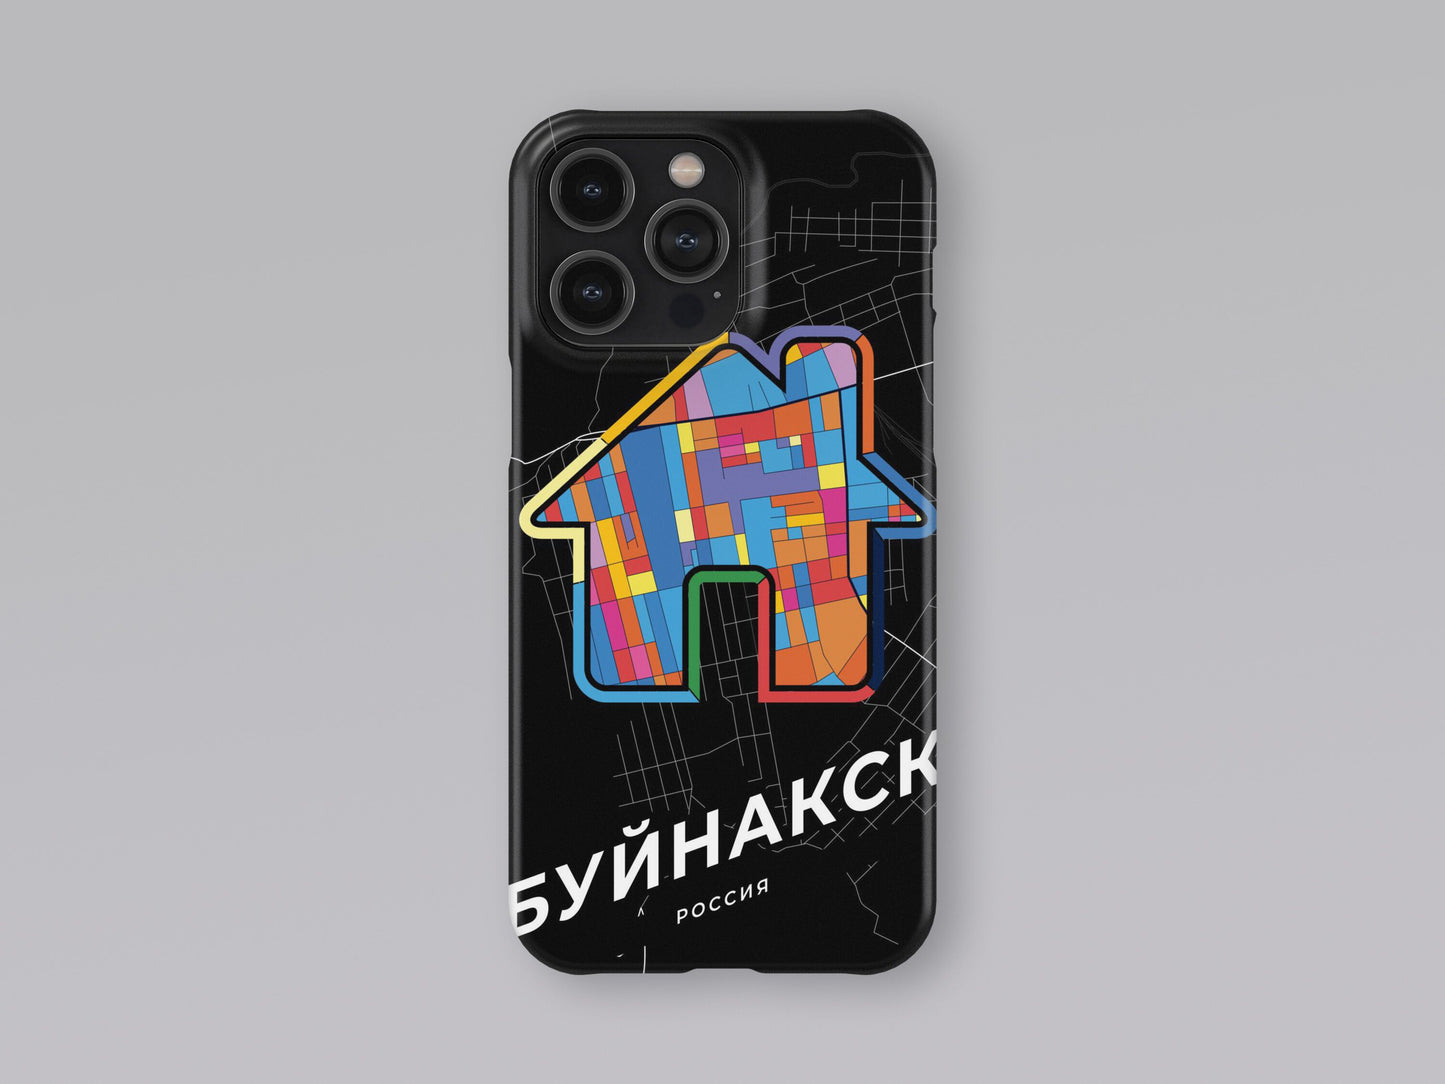 Buynaksk Russia slim phone case with colorful icon. Birthday, wedding or housewarming gift. Couple match cases. 3